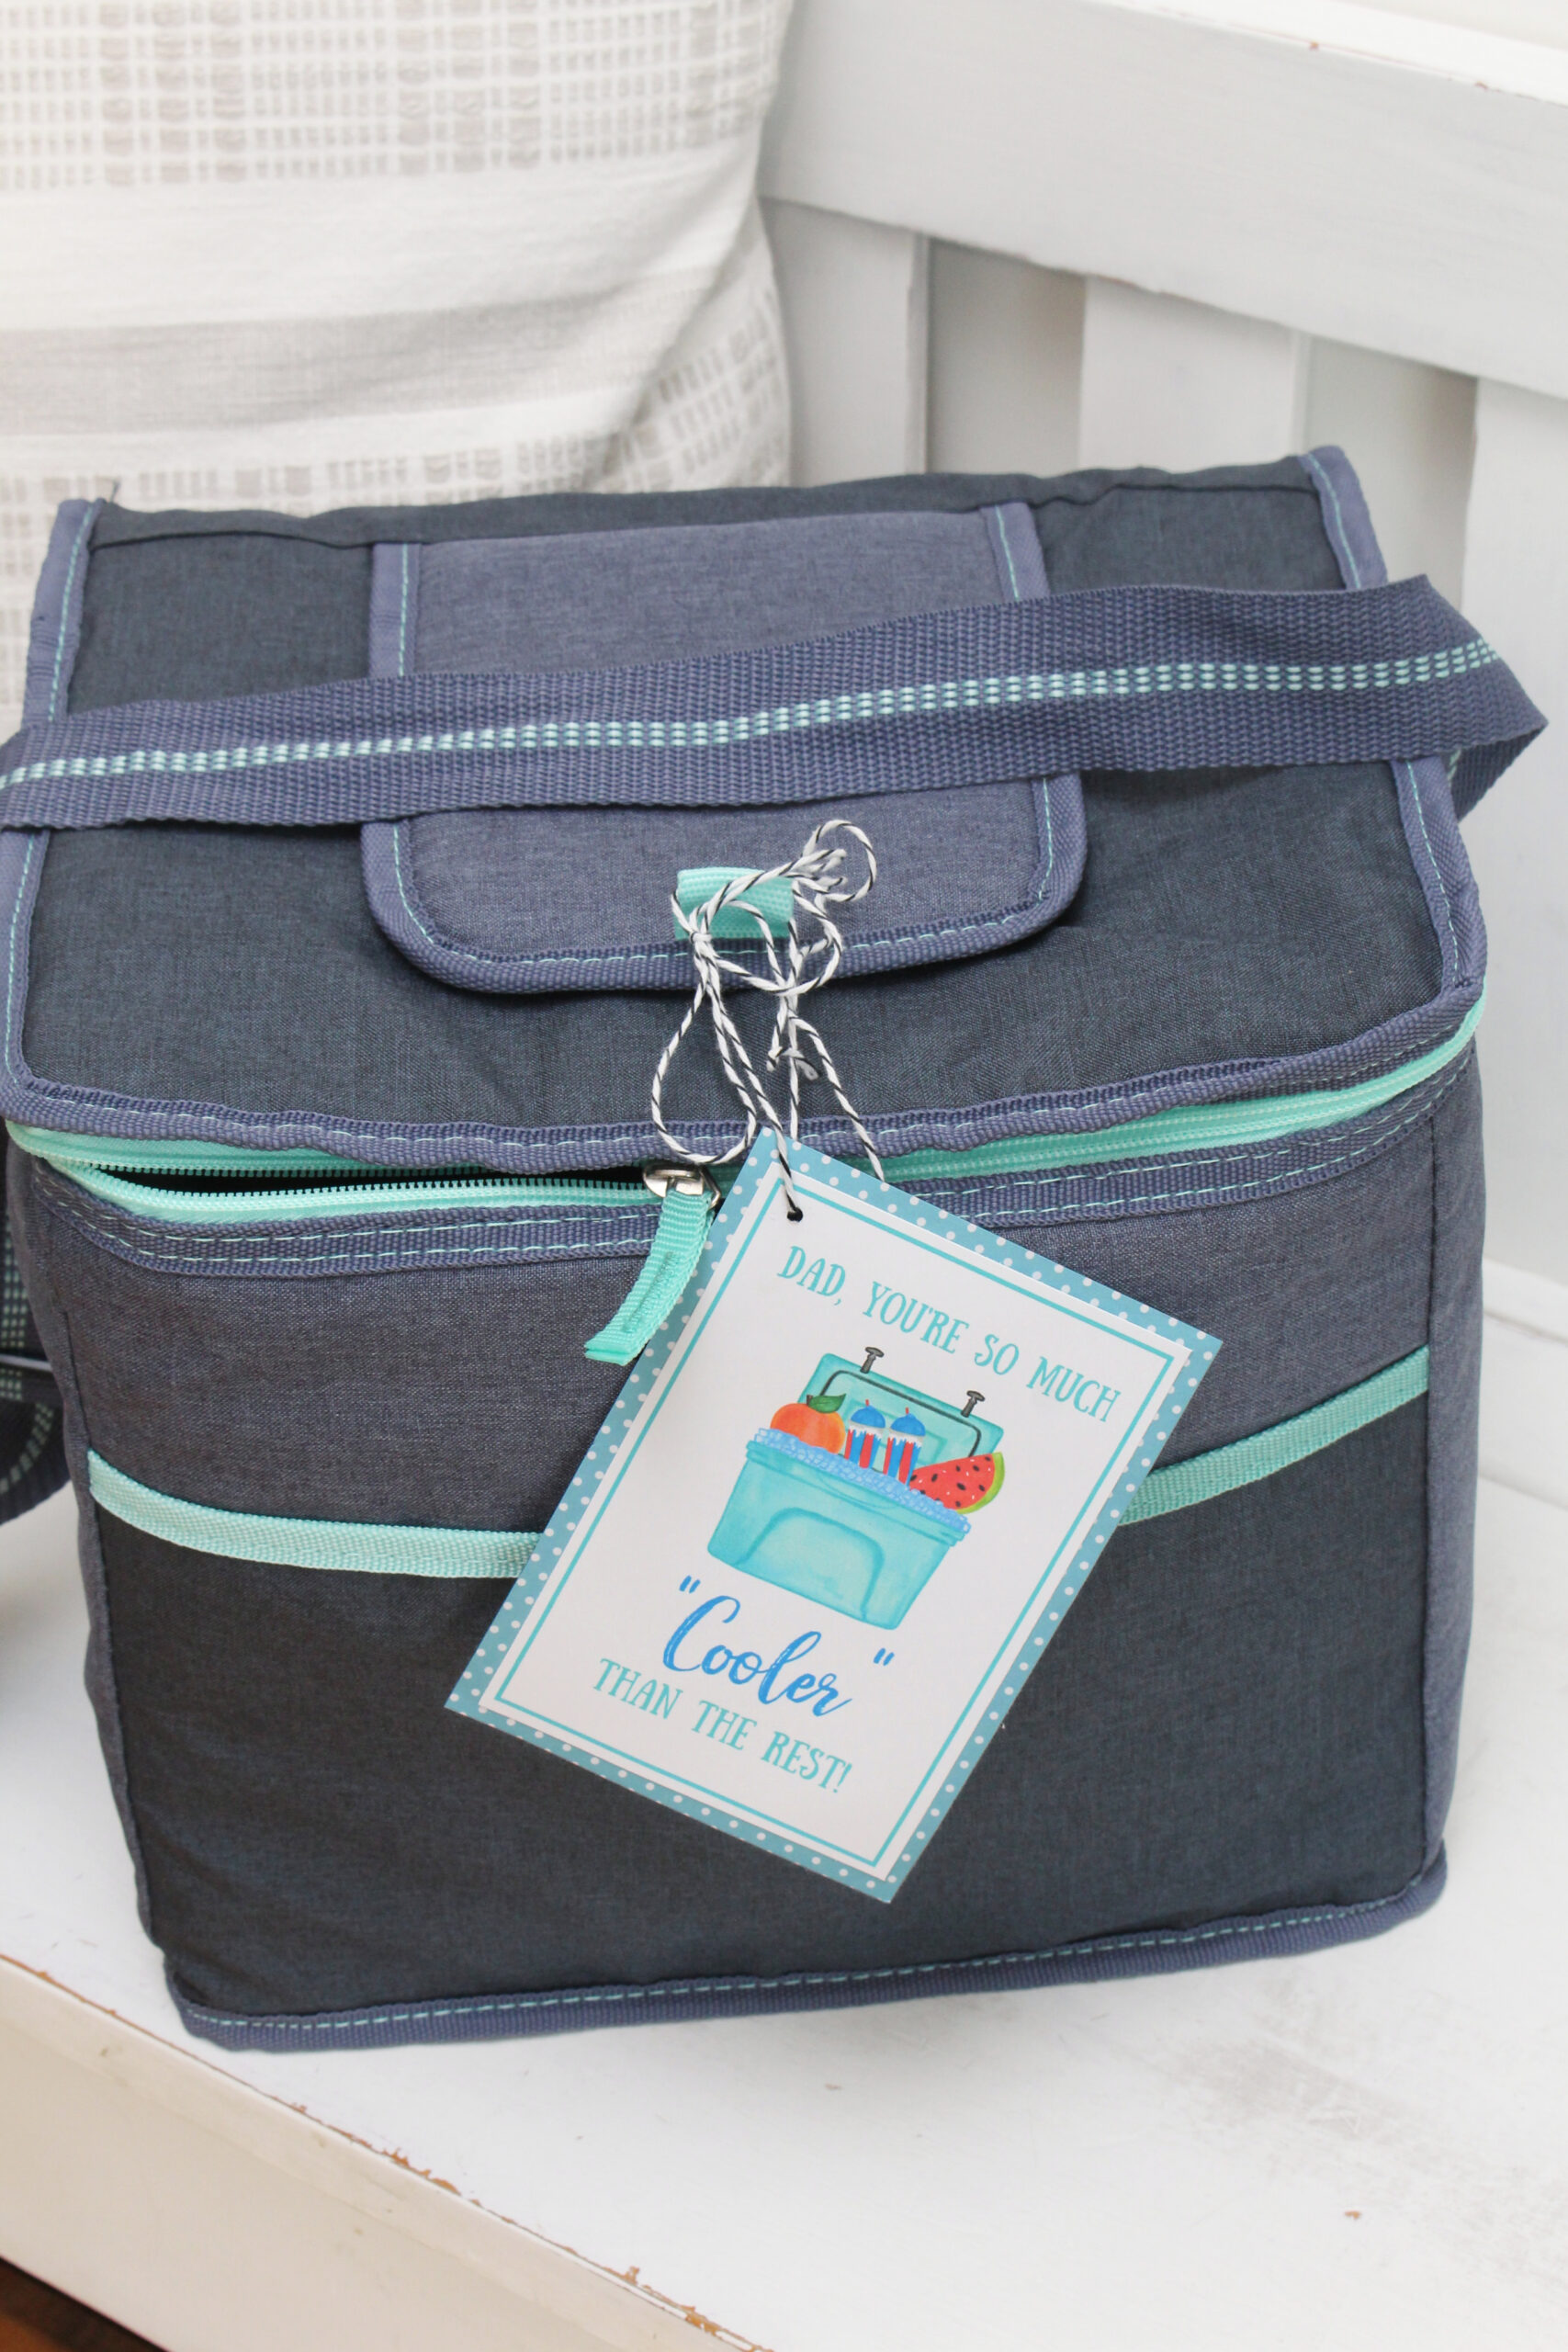 Ice cooler Father's Day gift with free printable coordinating card.